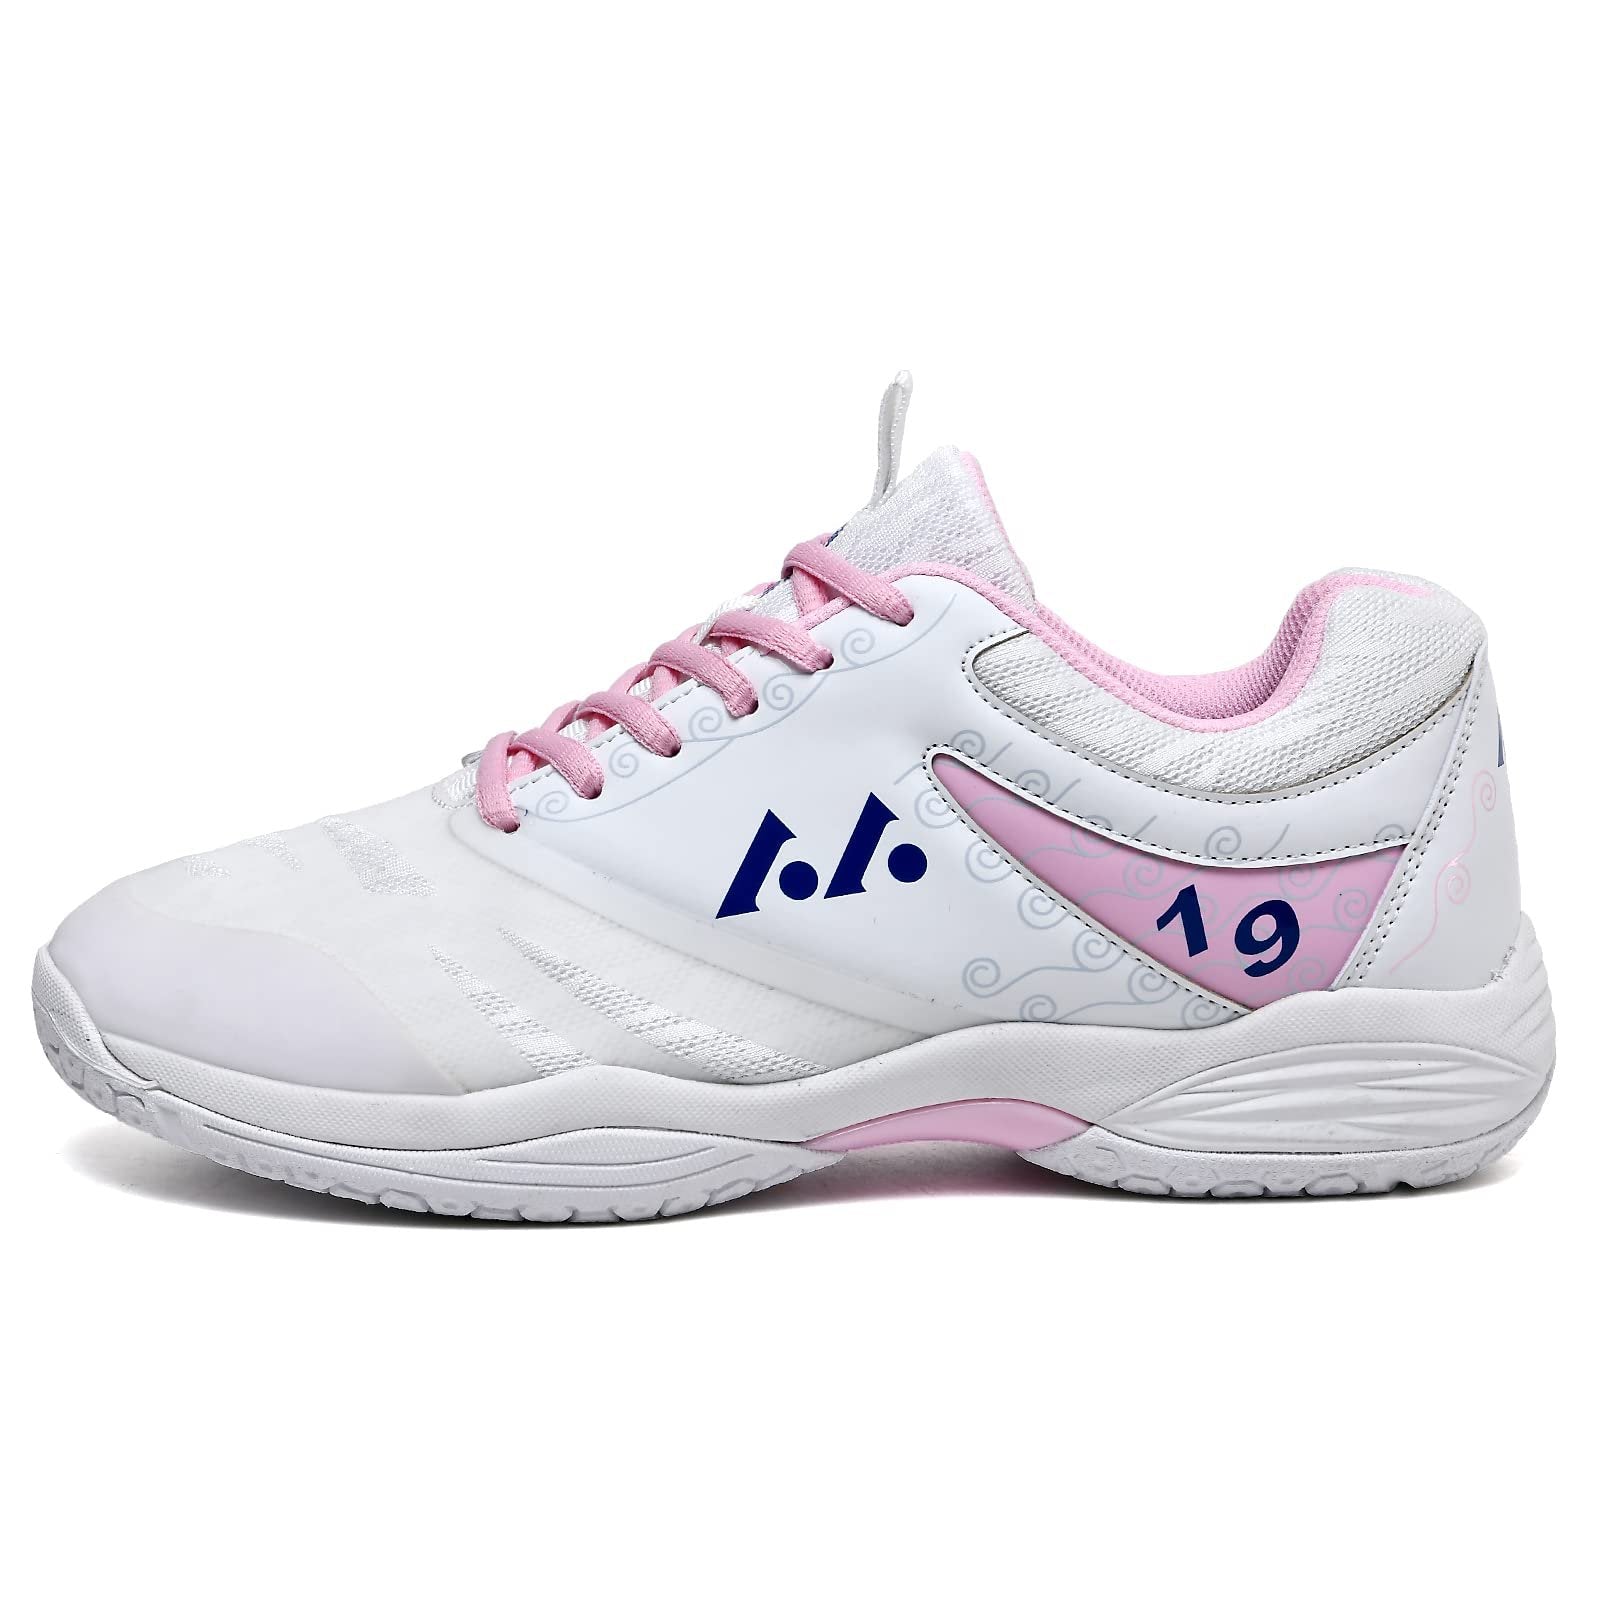 Womens Mens Lightweight Indoor Court Shoes Badminton Shoes for Pickleball, Tennis, Table Tennis, Volleyball (019 White, 39)